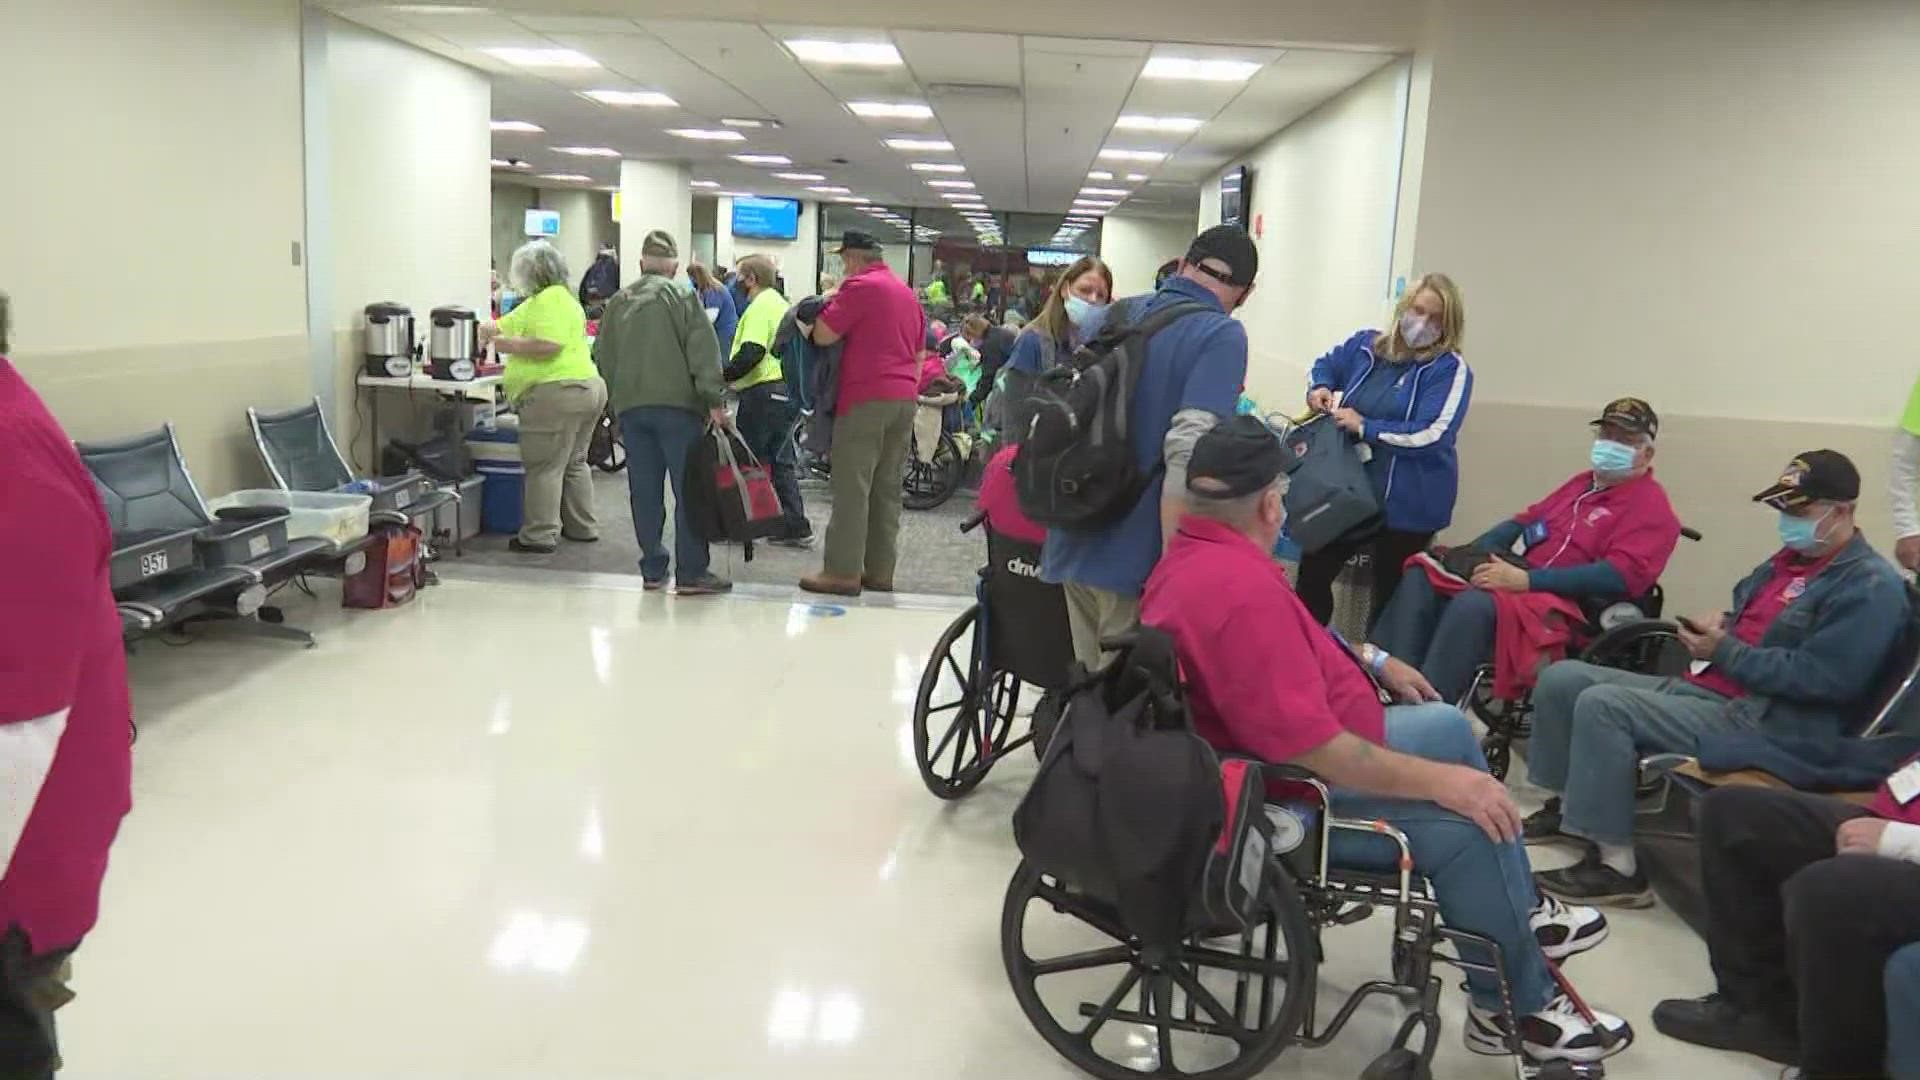 220 veterans are heading to Washington D.C. on the last Honor Flight of the year out of Columbus.